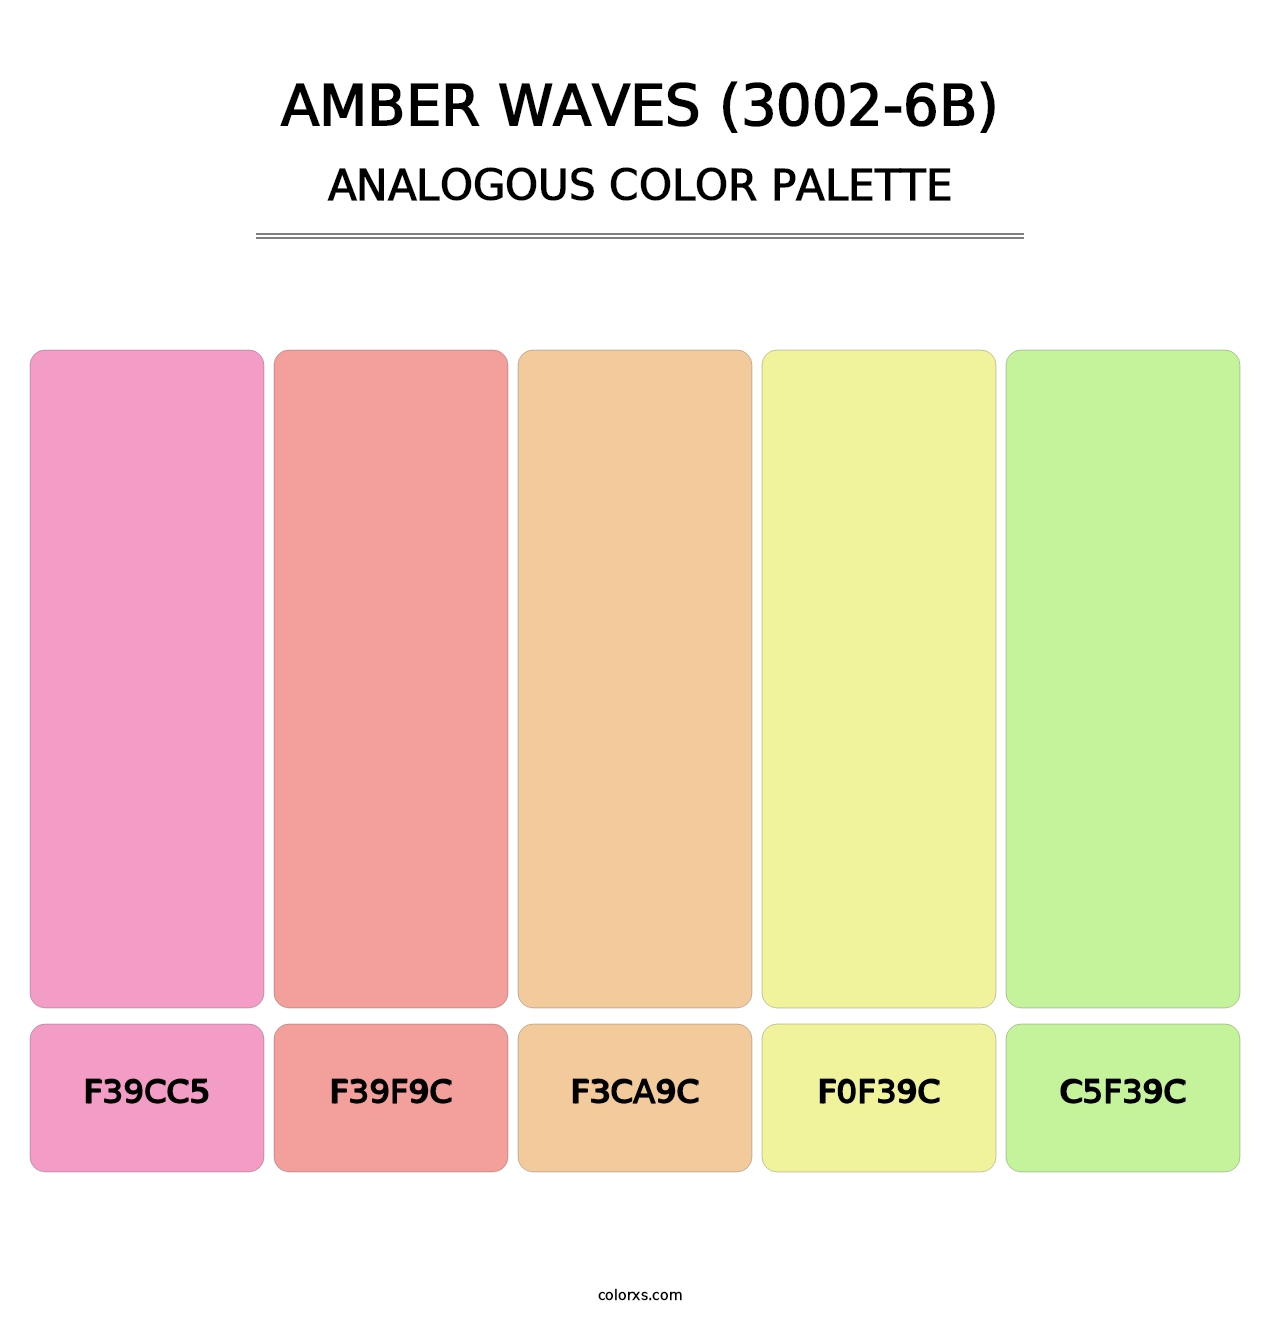 Amber Waves (3002-6B) - Analogous Color Palette